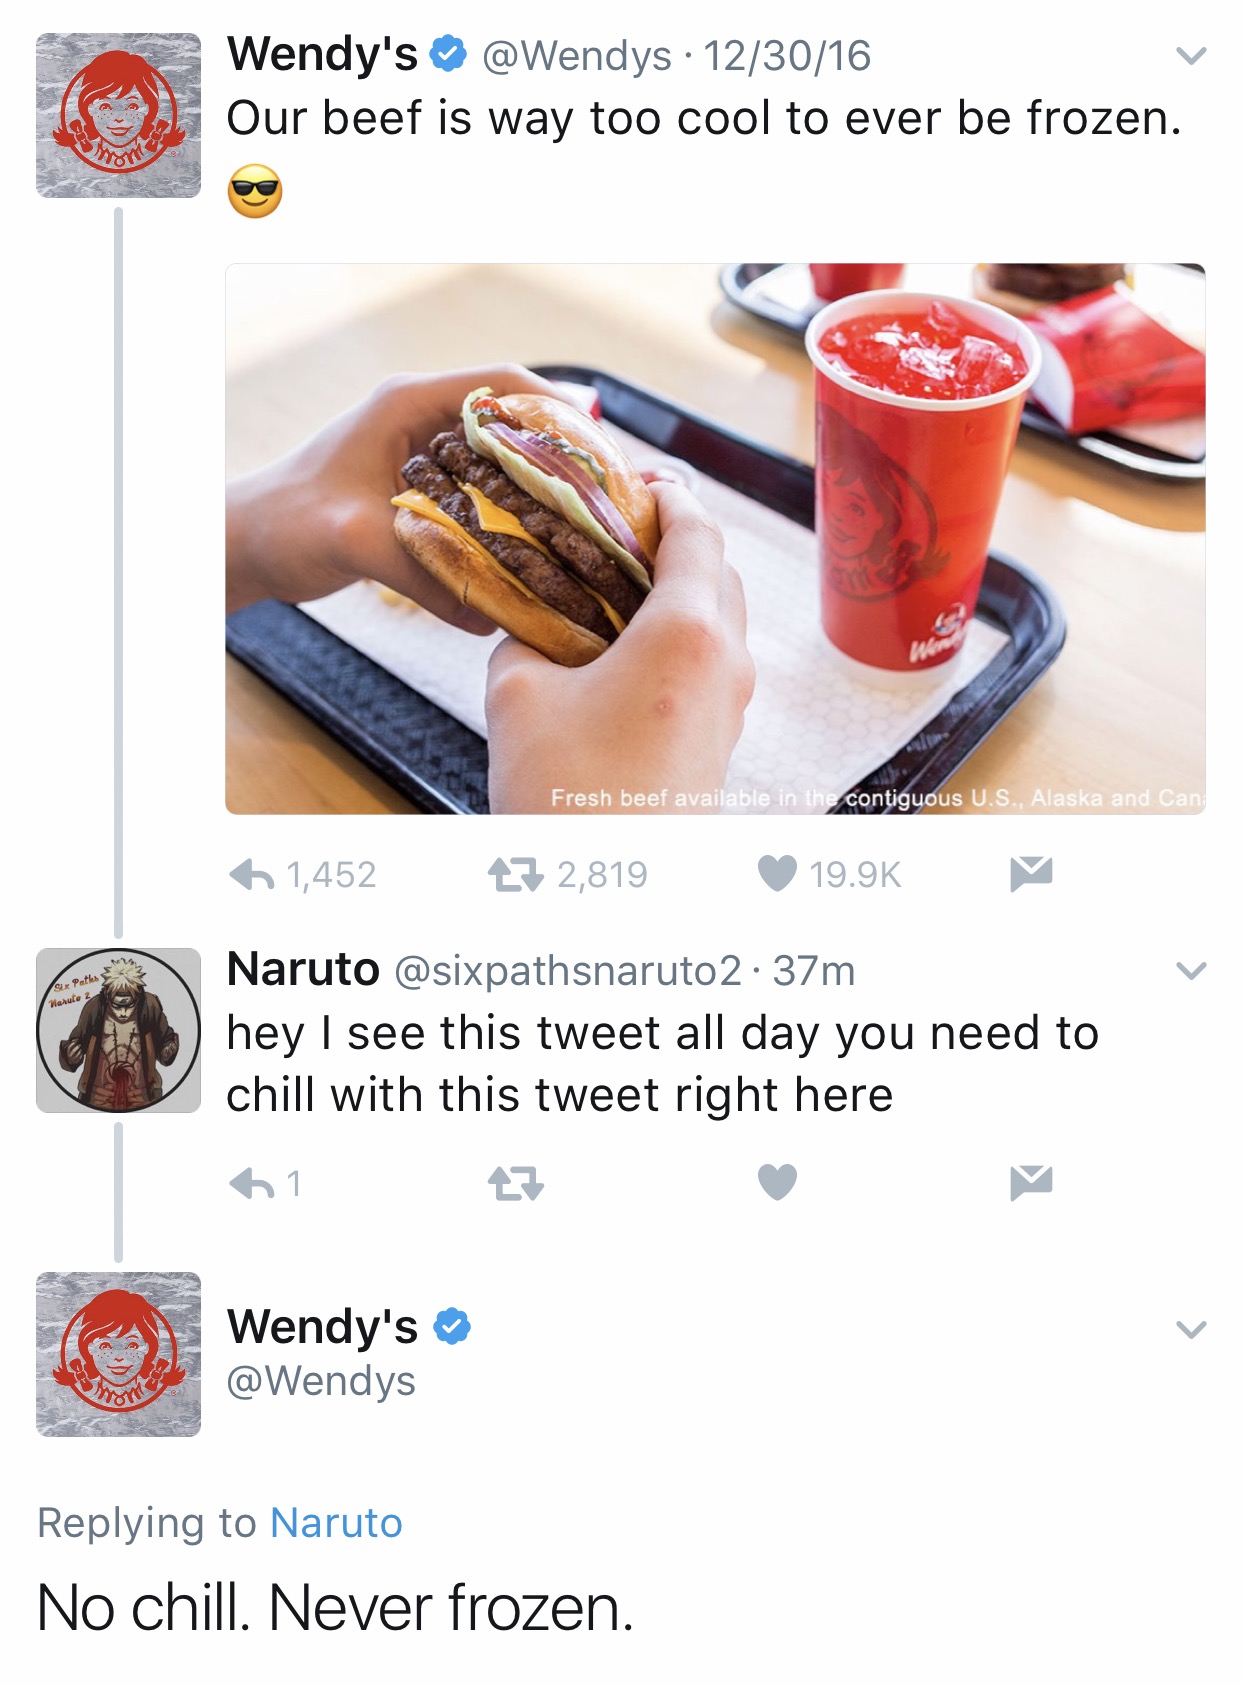 wendy's savage comments - Wendy's 123016 Our beef is way too cool to ever be frozen. Fresh beef available in the contiguous U.S. Alaska and Can 1,452 272,819 Sur Paths Heute Naruto 37m hey I see this tweet all day you need to chill with this tweet right h